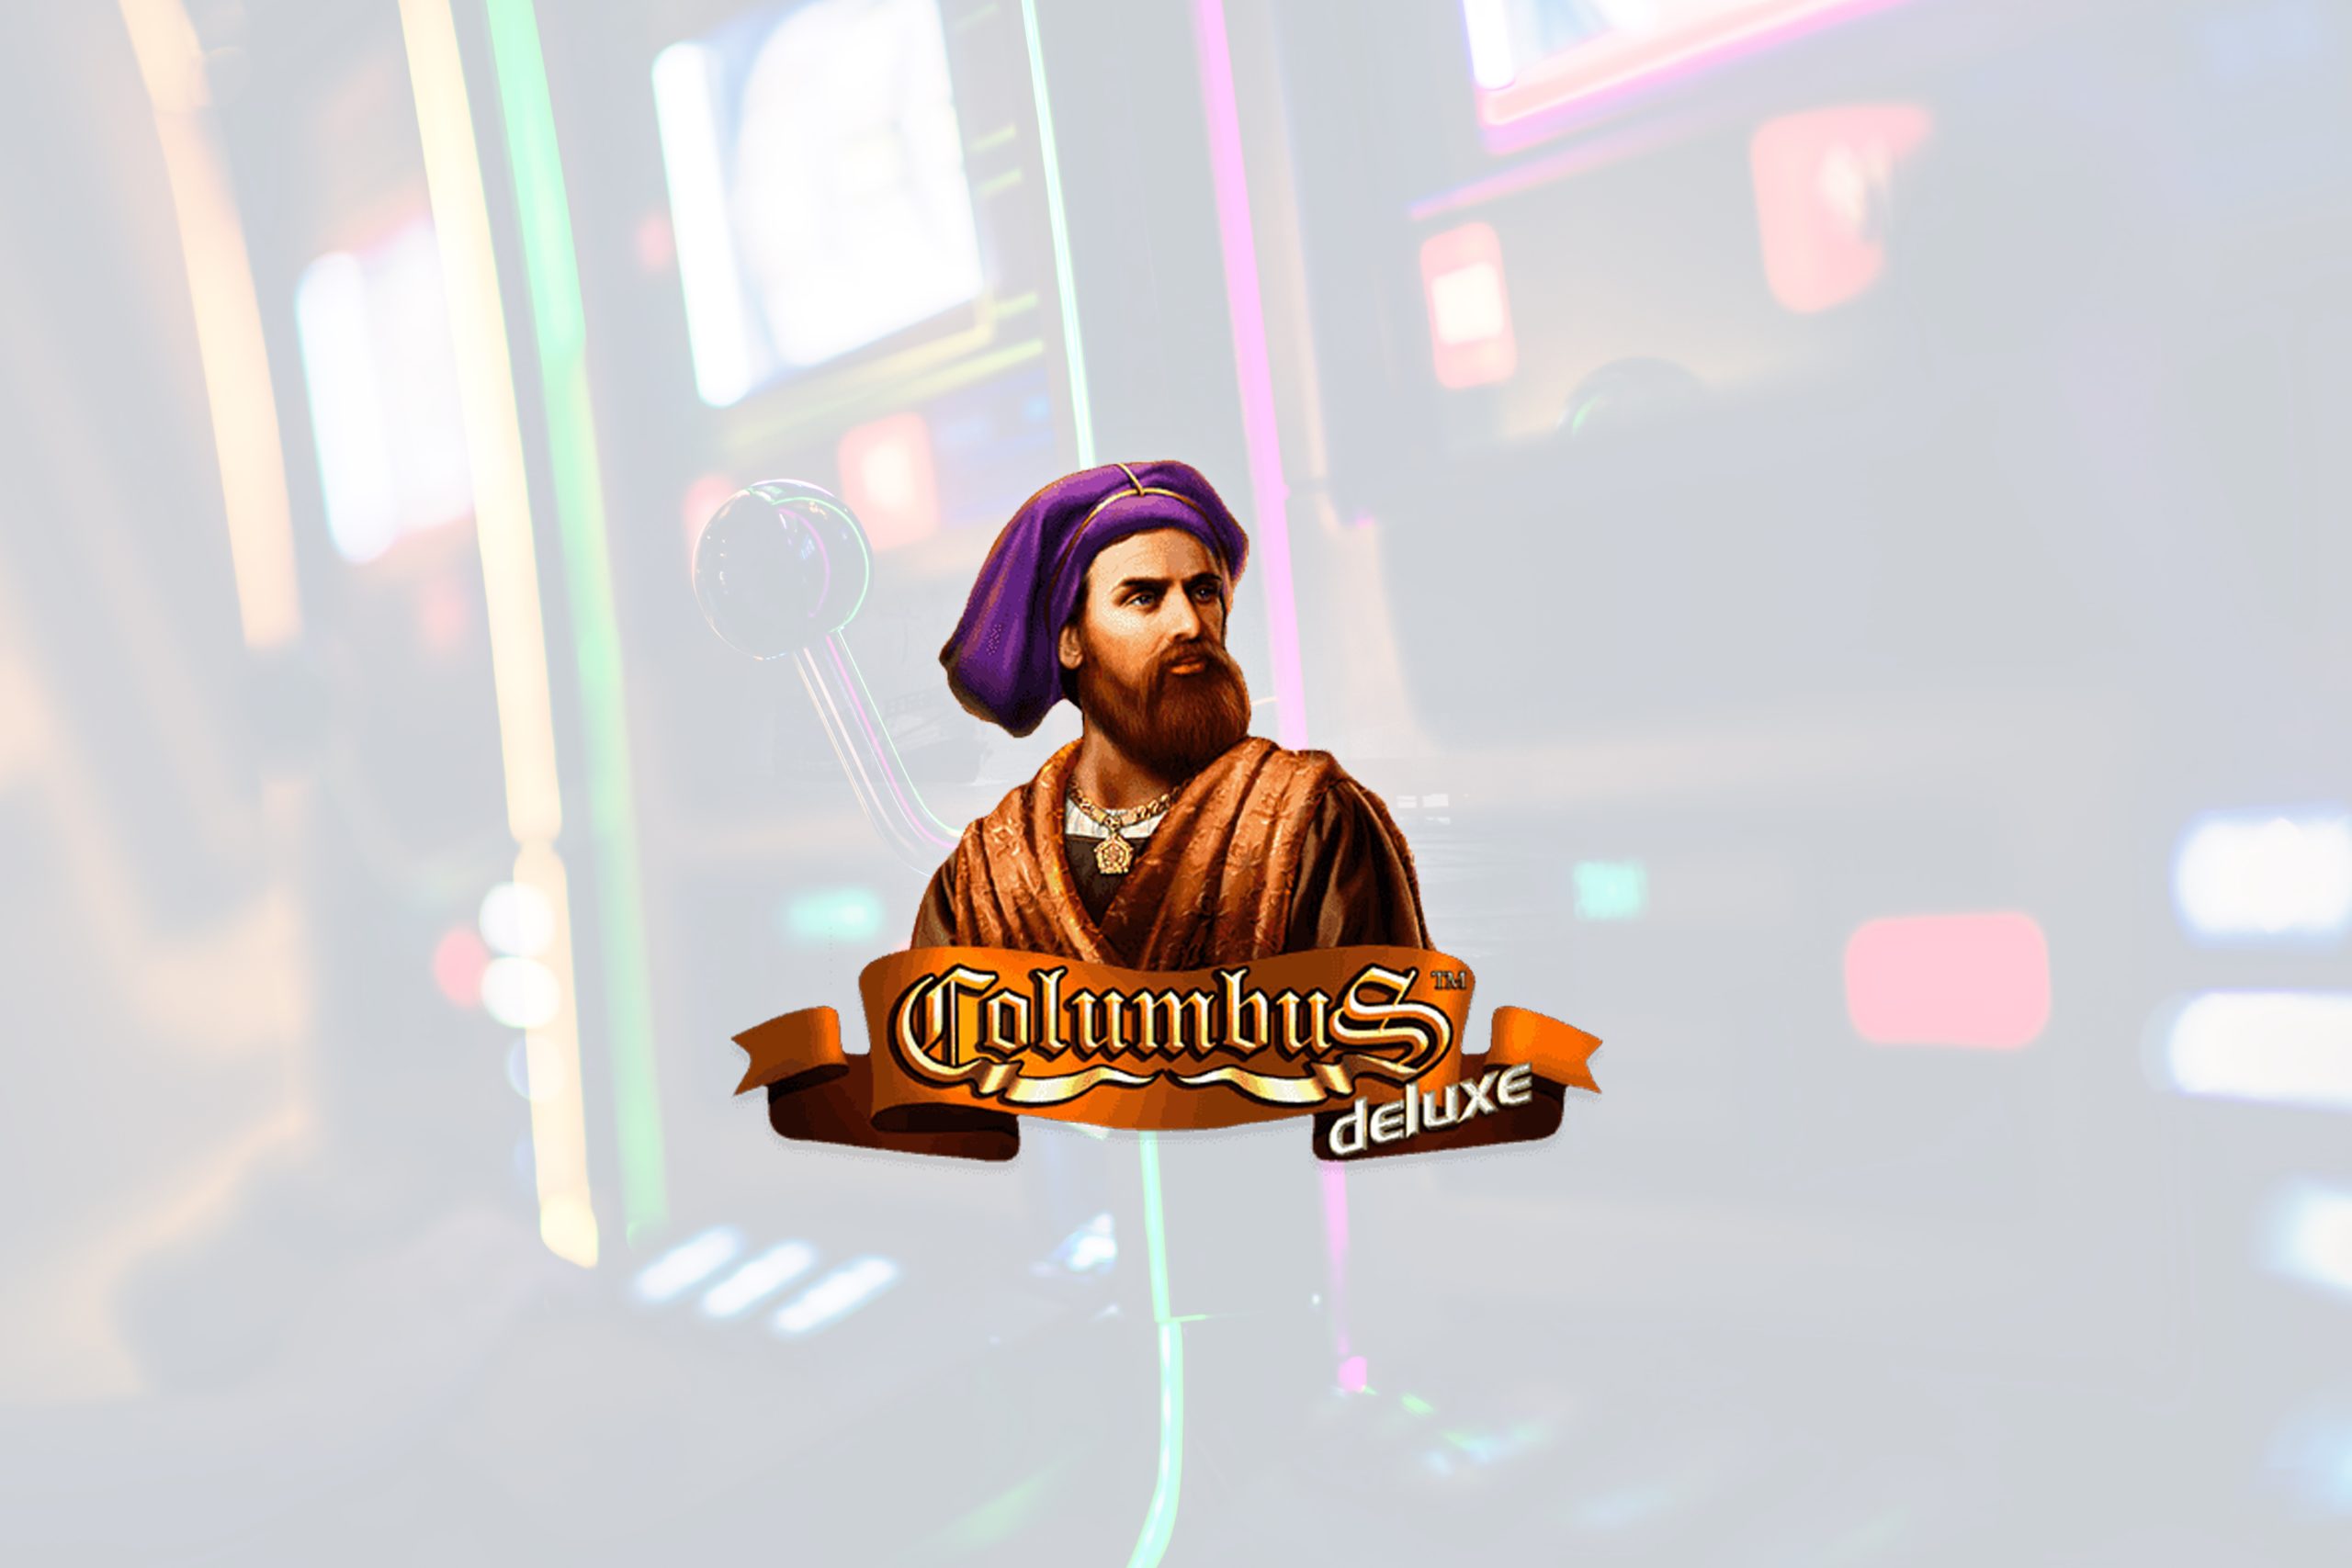 Columbus Slot Not On Gamstop Review